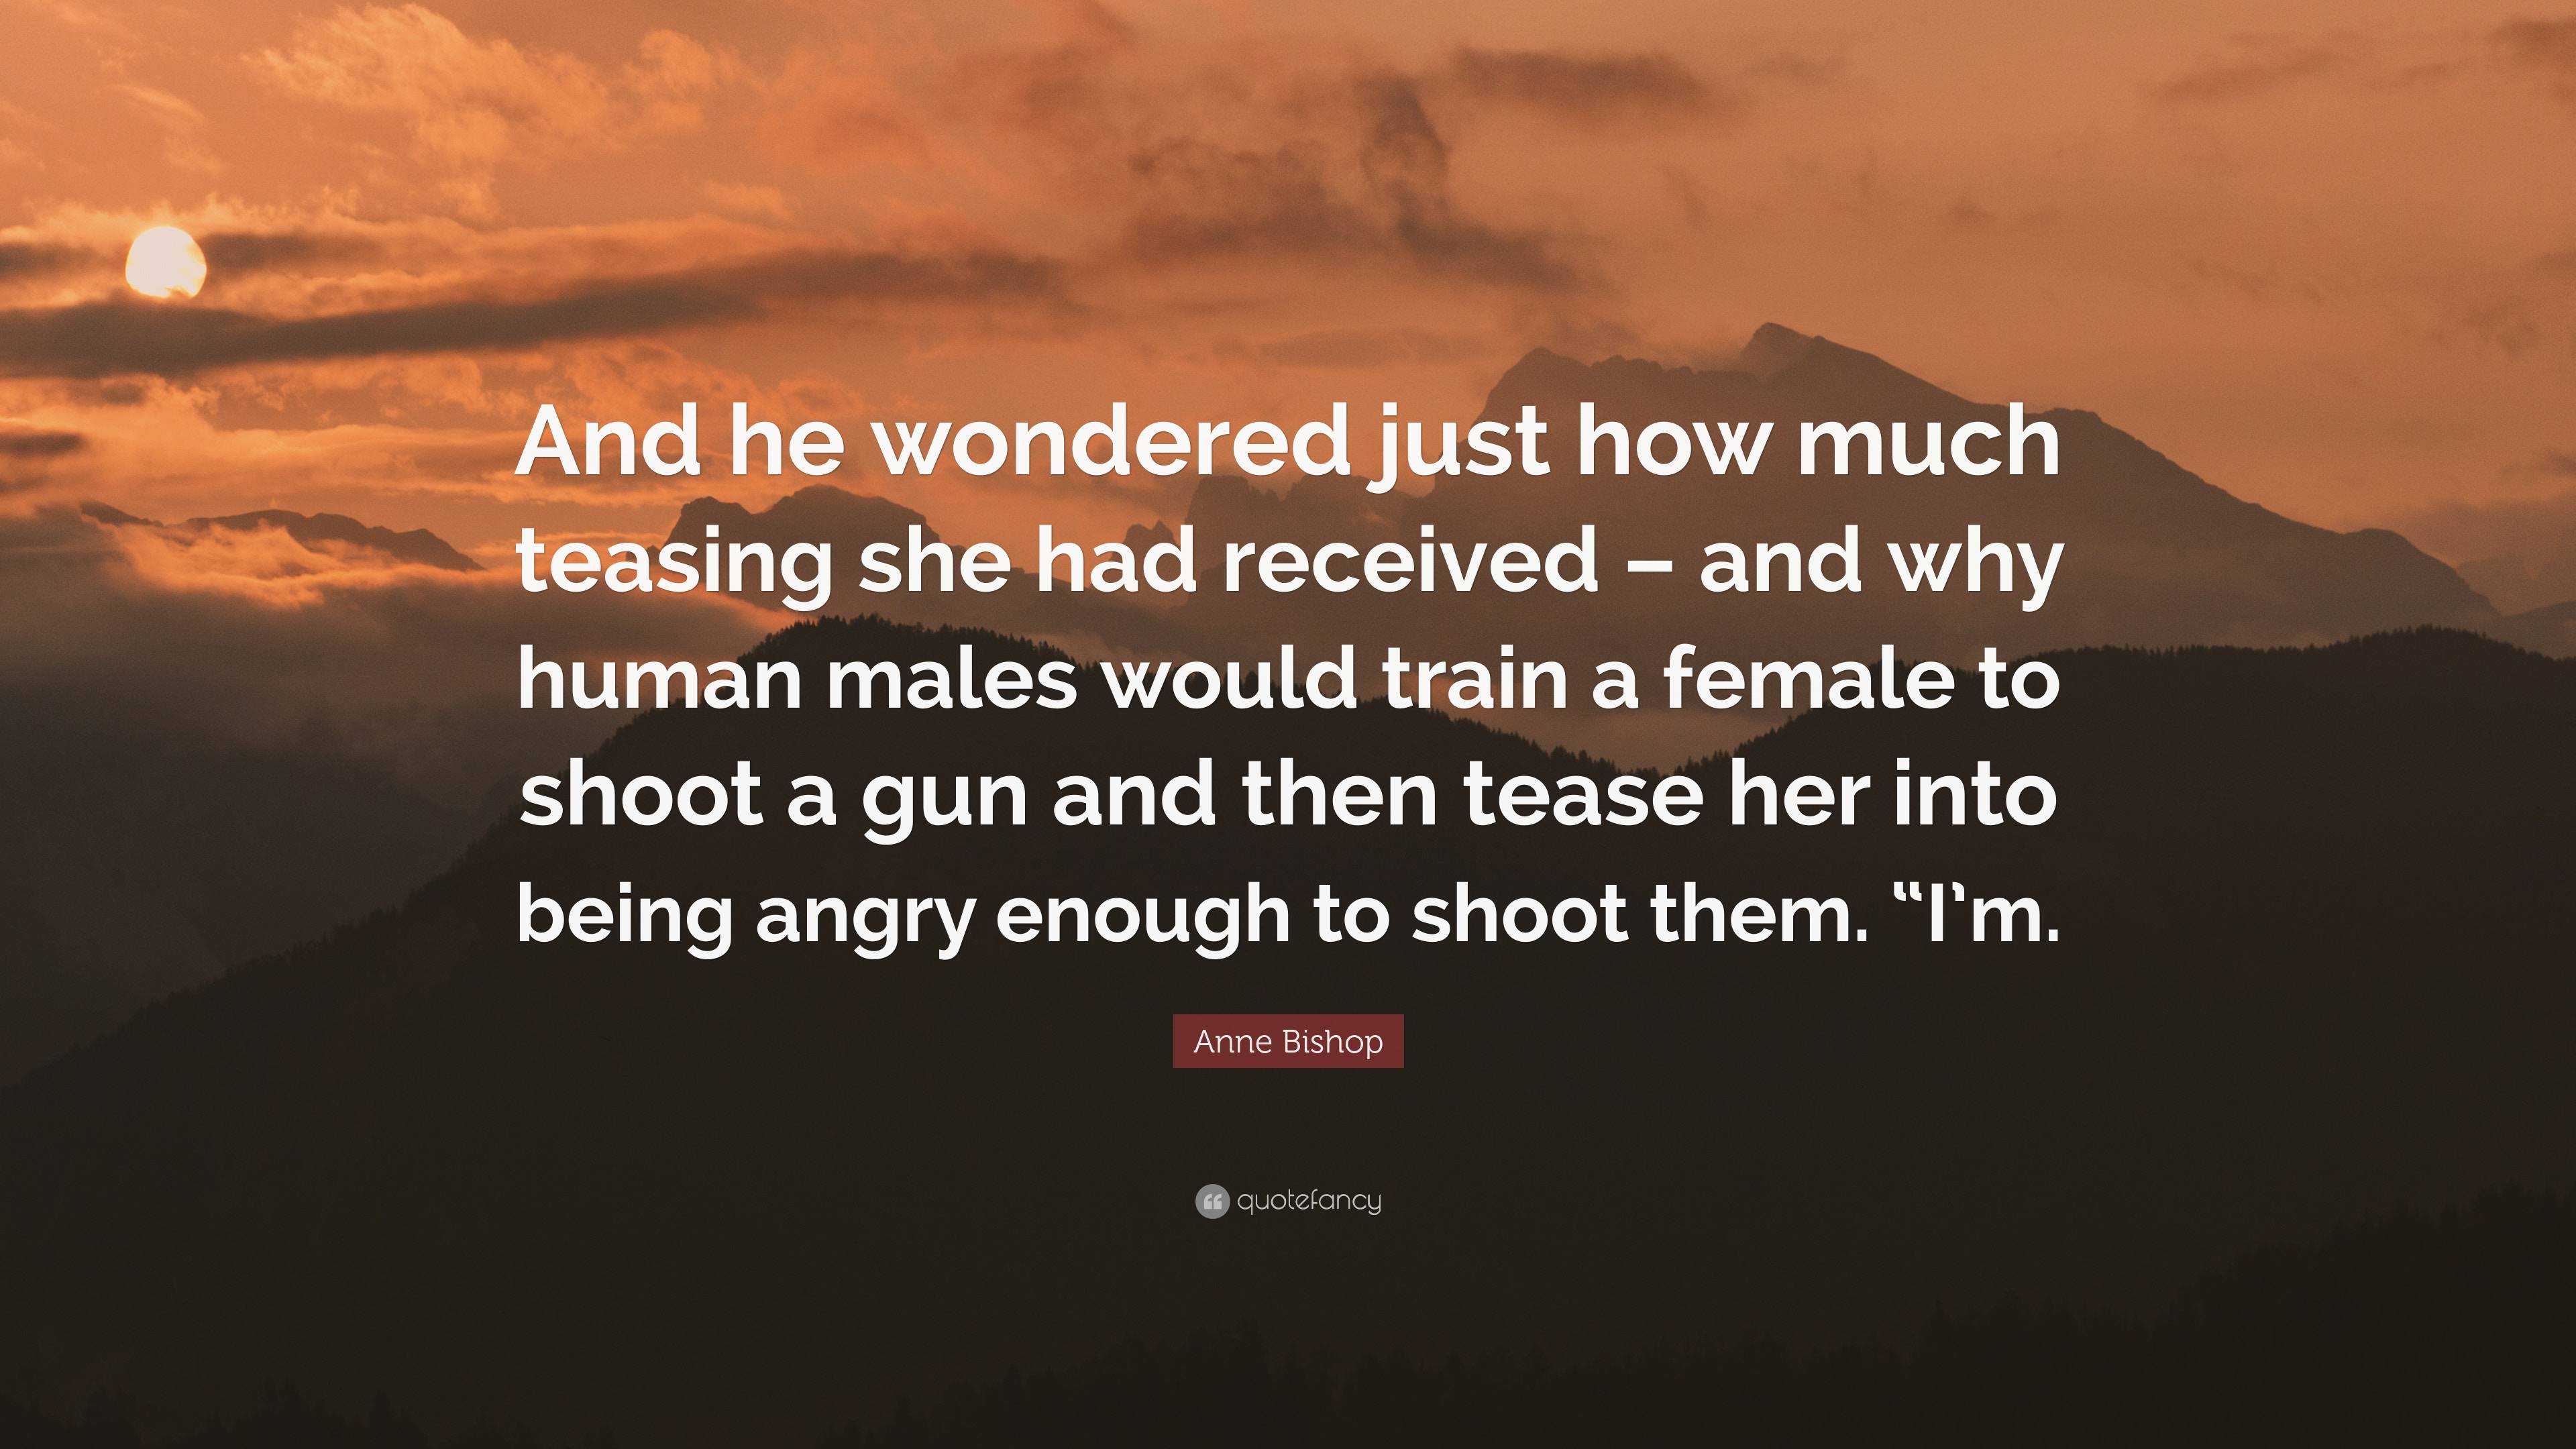 Anne Bishop Quote: “And he wondered just how much teasing she had received  – and why human males would train a female to shoot a gun and the”